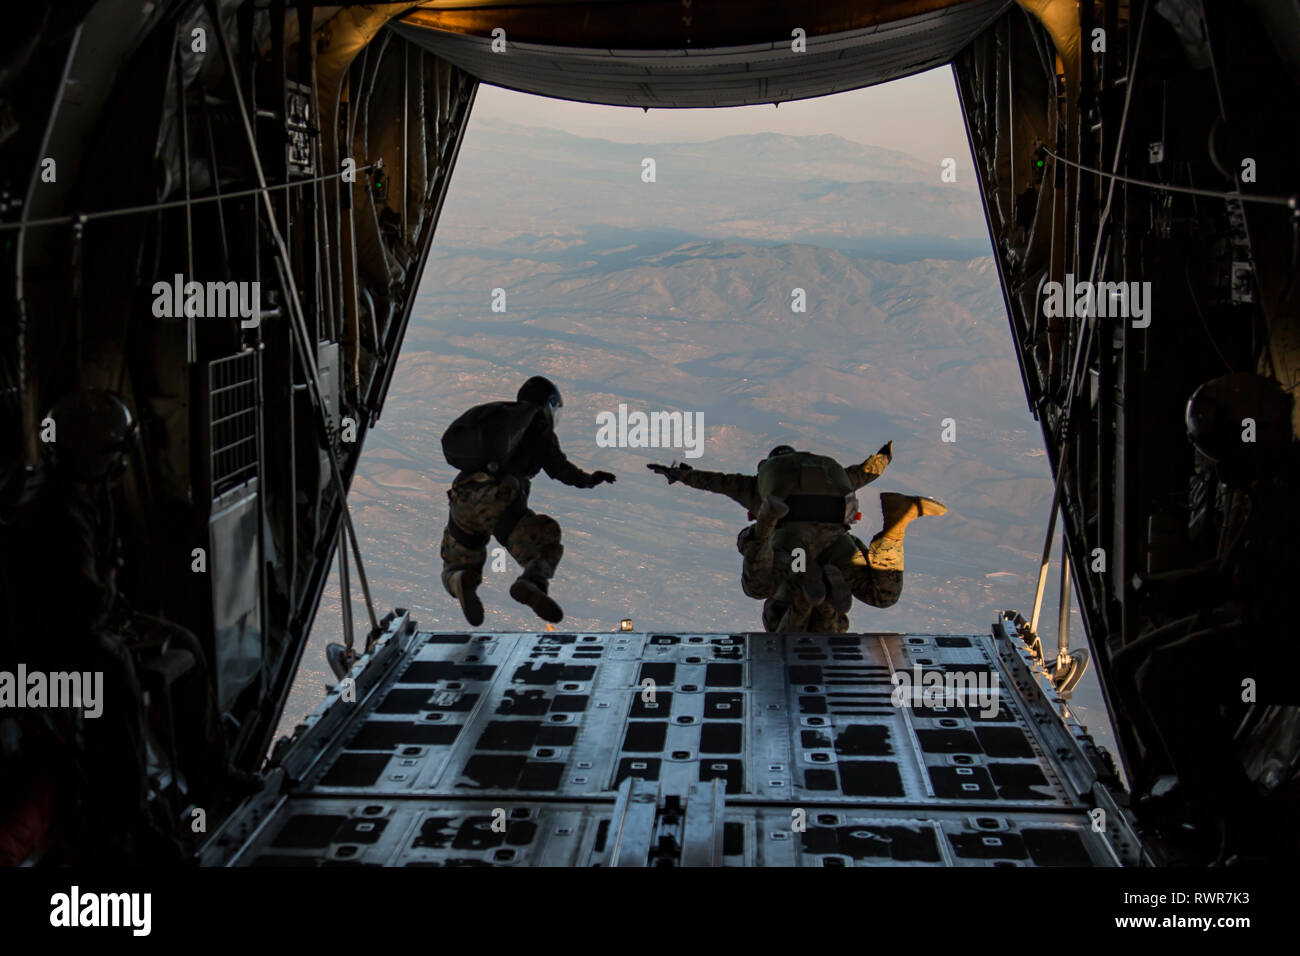 U.S. Marines with 1st Marine Raider Battalion (MRB) participate in air drop training during Exercise Yuma Horizon 19 near Marine Corps Air Station Camp Pendleton, California, Jan. 10, 2019. Marine Aerial Refueler Transport Squadron 152 and 1st MRB conducted low-level static line jumps and military free fall training to maintain proficiency and fulfill training requirements. (U.S. Marine Corps photo by Lance Cpl. Seth Rosenberg) Stock Photo